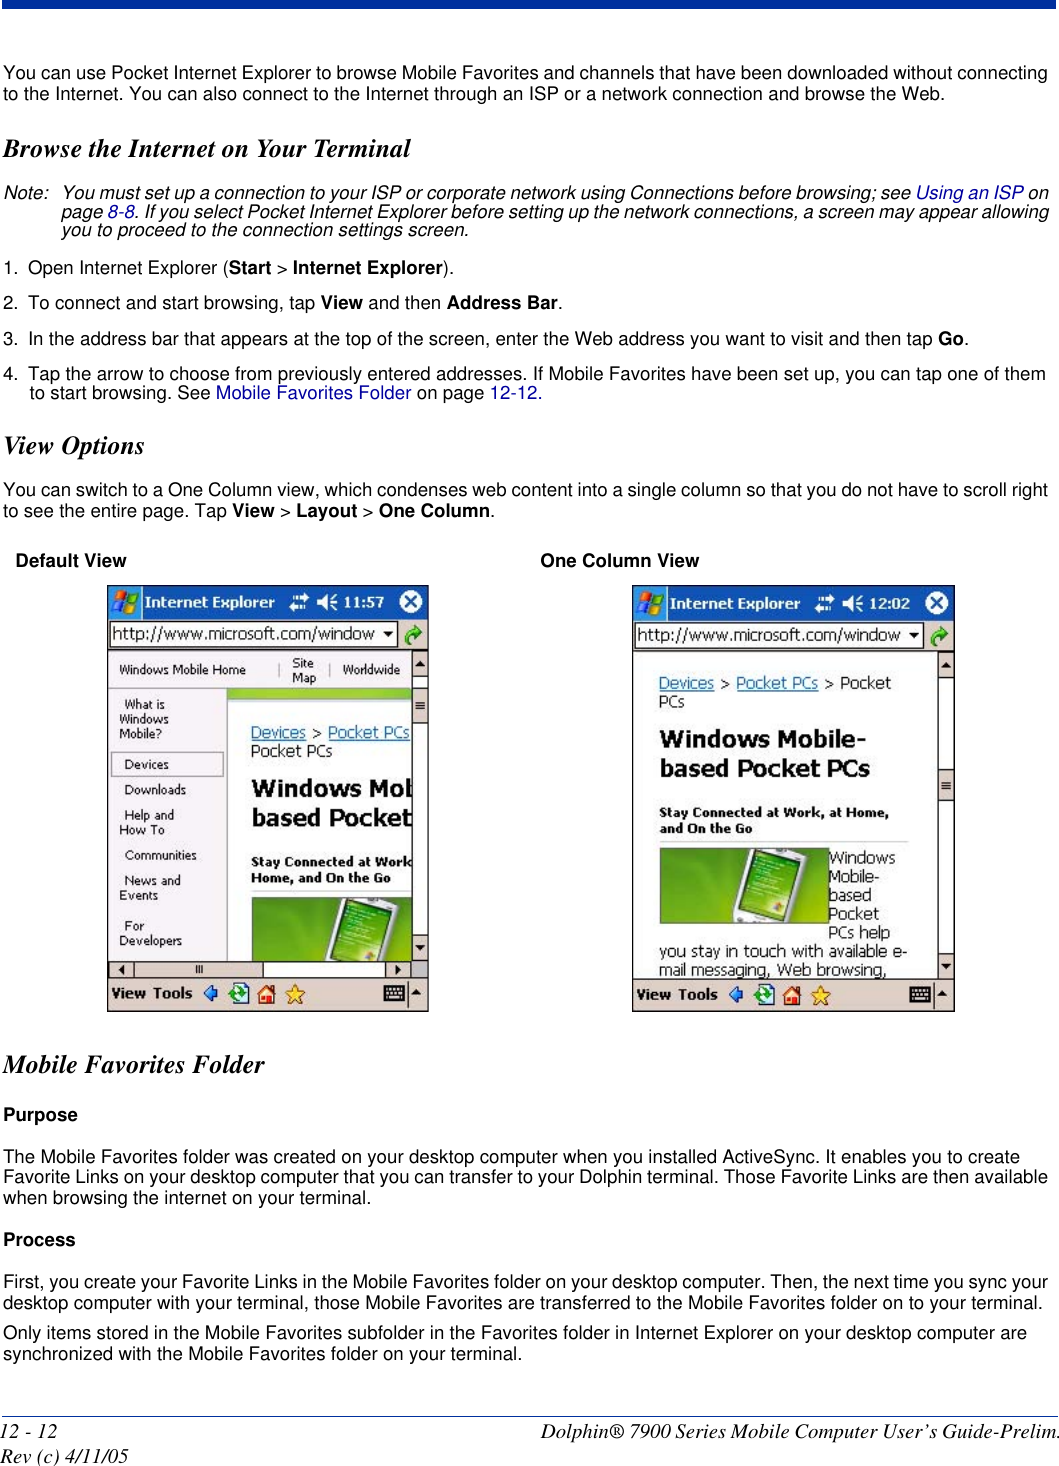 12 - 12 Dolphin® 7900 Series Mobile Computer User’s Guide-Prelim. Rev (c) 4/11/05You can use Pocket Internet Explorer to browse Mobile Favorites and channels that have been downloaded without connecting to the Internet. You can also connect to the Internet through an ISP or a network connection and browse the Web.Browse the Internet on Your TerminalNote: You must set up a connection to your ISP or corporate network using Connections before browsing; see Using an ISP on page 8-8. If you select Pocket Internet Explorer before setting up the network connections, a screen may appear allowing you to proceed to the connection settings screen. 1. Open Internet Explorer (Start &gt; Internet Explorer).2. To connect and start browsing, tap View and then Address Bar. 3. In the address bar that appears at the top of the screen, enter the Web address you want to visit and then tap Go. 4. Tap the arrow to choose from previously entered addresses. If Mobile Favorites have been set up, you can tap one of them to start browsing. See Mobile Favorites Folder on page 12-12. View OptionsYou can switch to a One Column view, which condenses web content into a single column so that you do not have to scroll right to see the entire page. Tap View &gt; Layout &gt; One Column.Mobile Favorites FolderPurposeThe Mobile Favorites folder was created on your desktop computer when you installed ActiveSync. It enables you to create Favorite Links on your desktop computer that you can transfer to your Dolphin terminal. Those Favorite Links are then available when browsing the internet on your terminal. ProcessFirst, you create your Favorite Links in the Mobile Favorites folder on your desktop computer. Then, the next time you sync your desktop computer with your terminal, those Mobile Favorites are transferred to the Mobile Favorites folder on to your terminal. Only items stored in the Mobile Favorites subfolder in the Favorites folder in Internet Explorer on your desktop computer are synchronized with the Mobile Favorites folder on your terminal. Default View  One Column View 